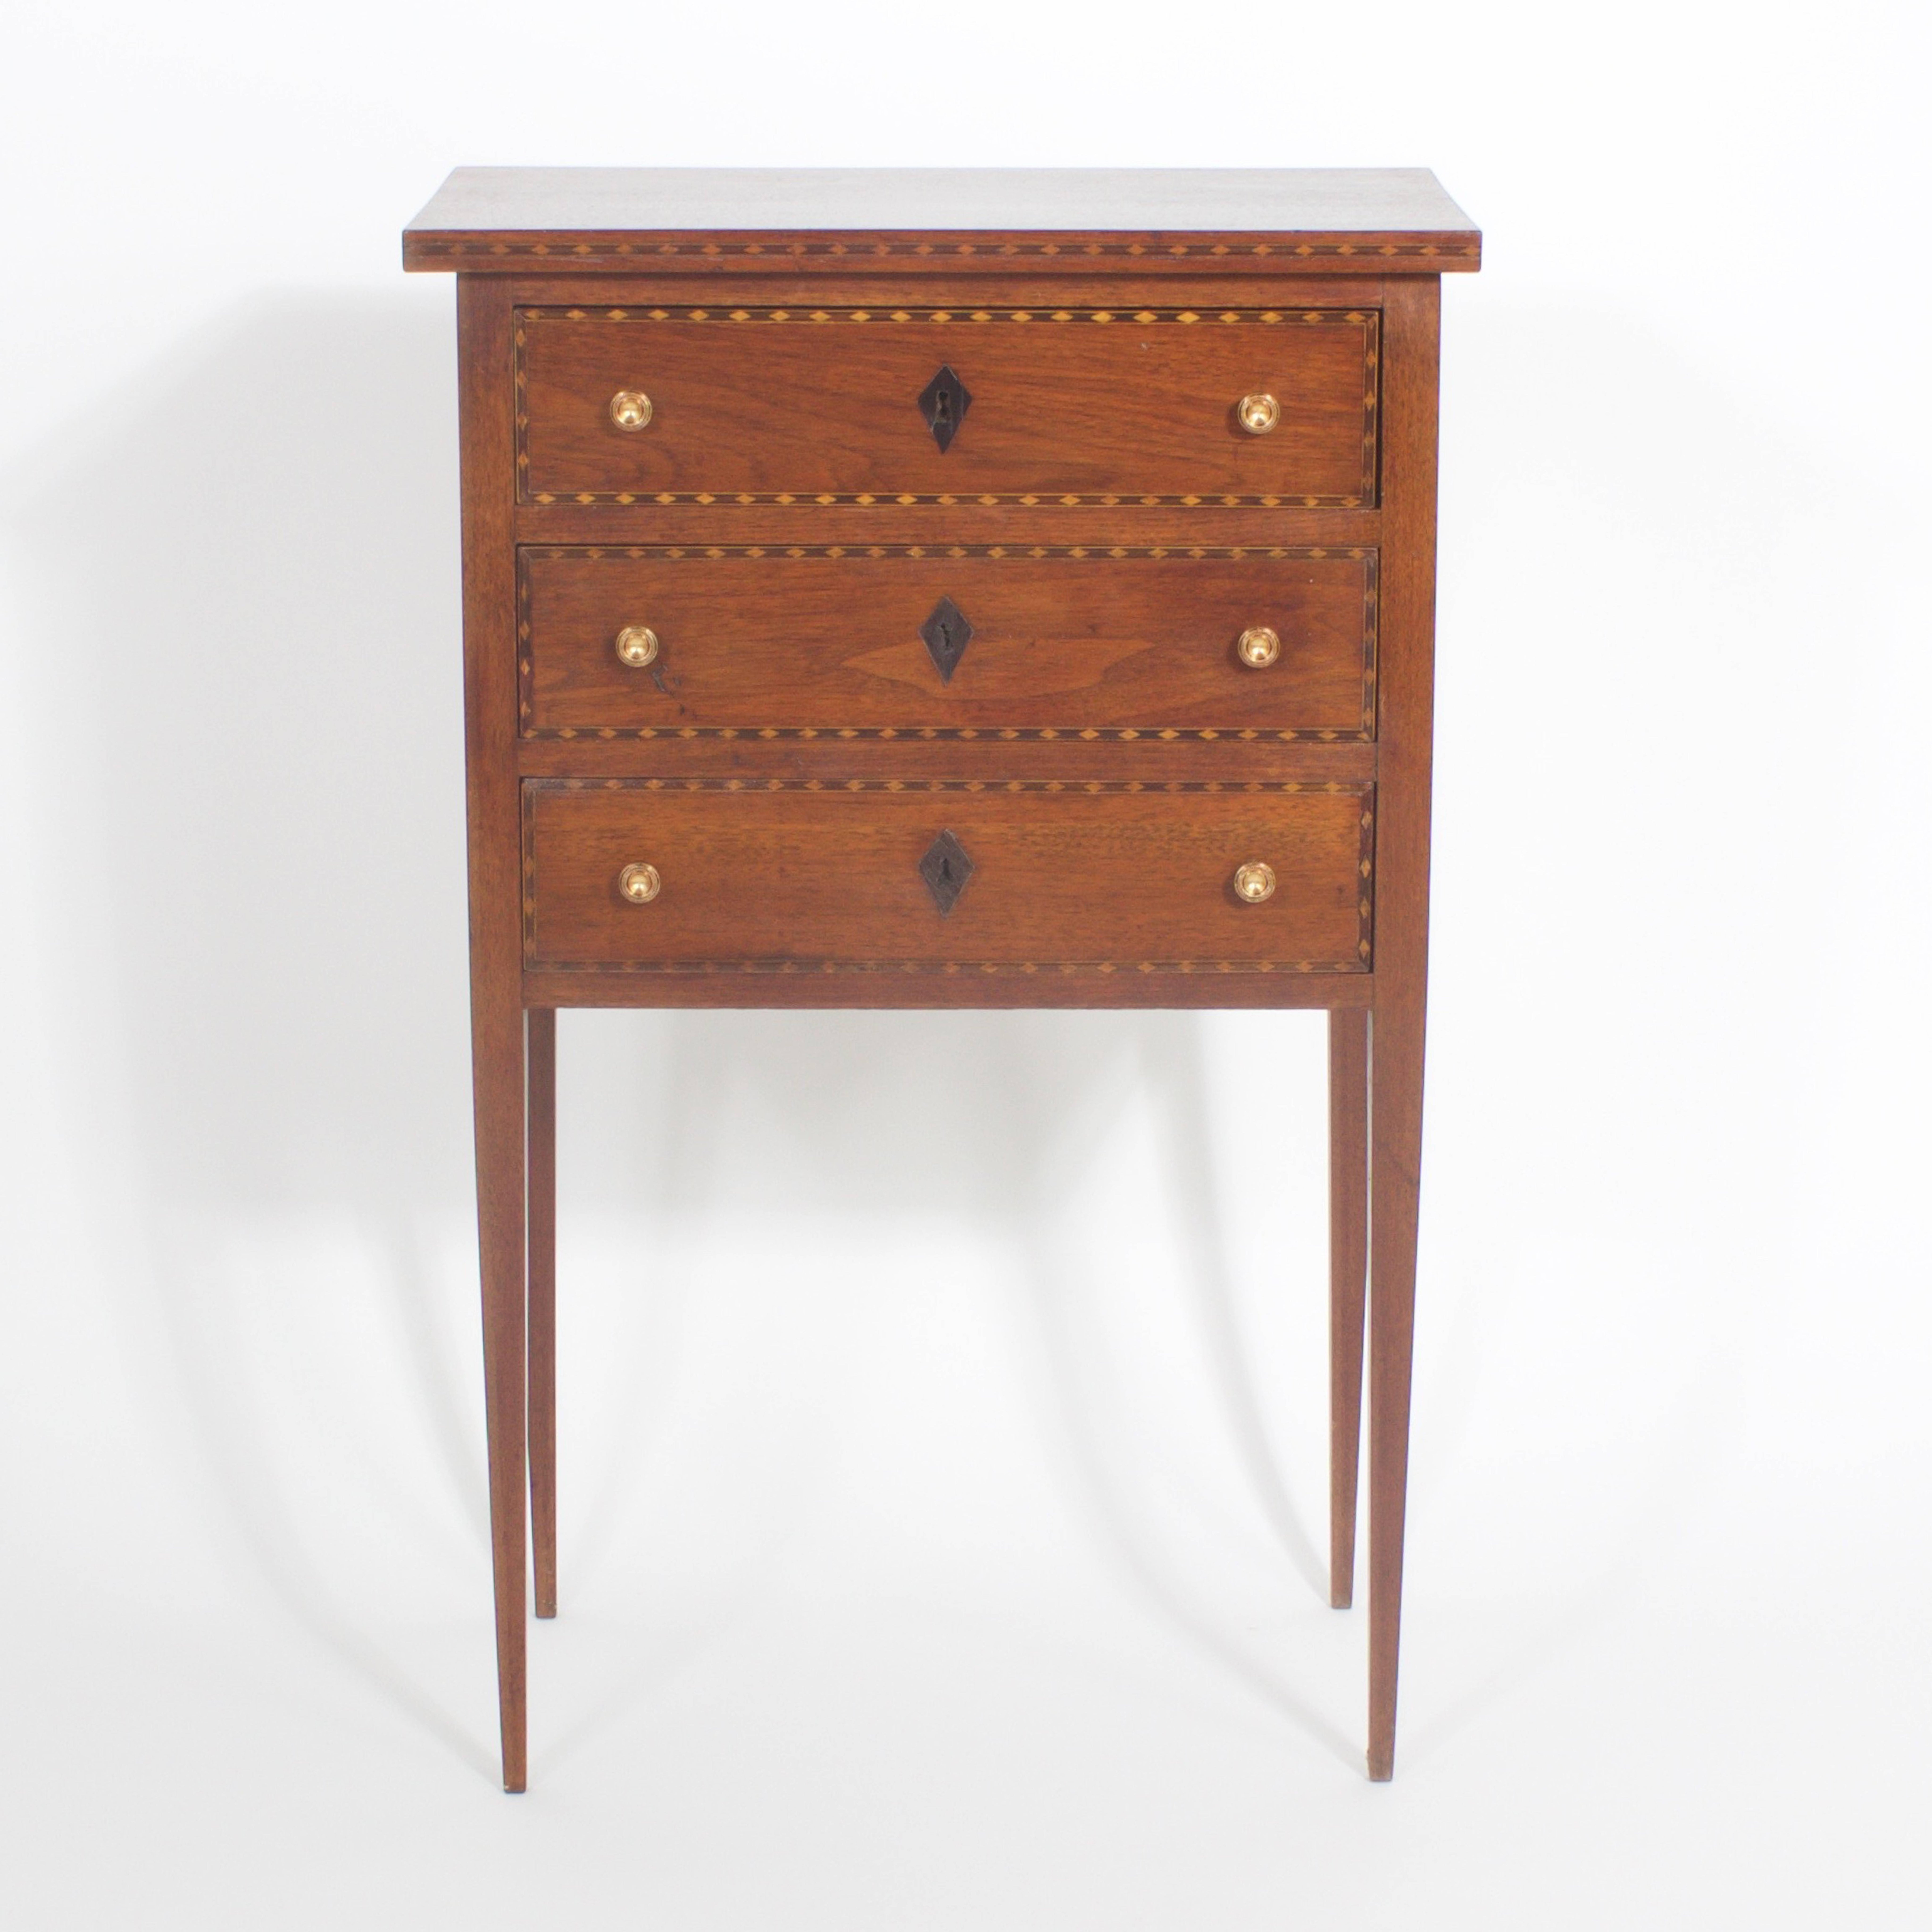 Pair of Mahogany Edwardian Three-Drawer Tables or Nightstands 1